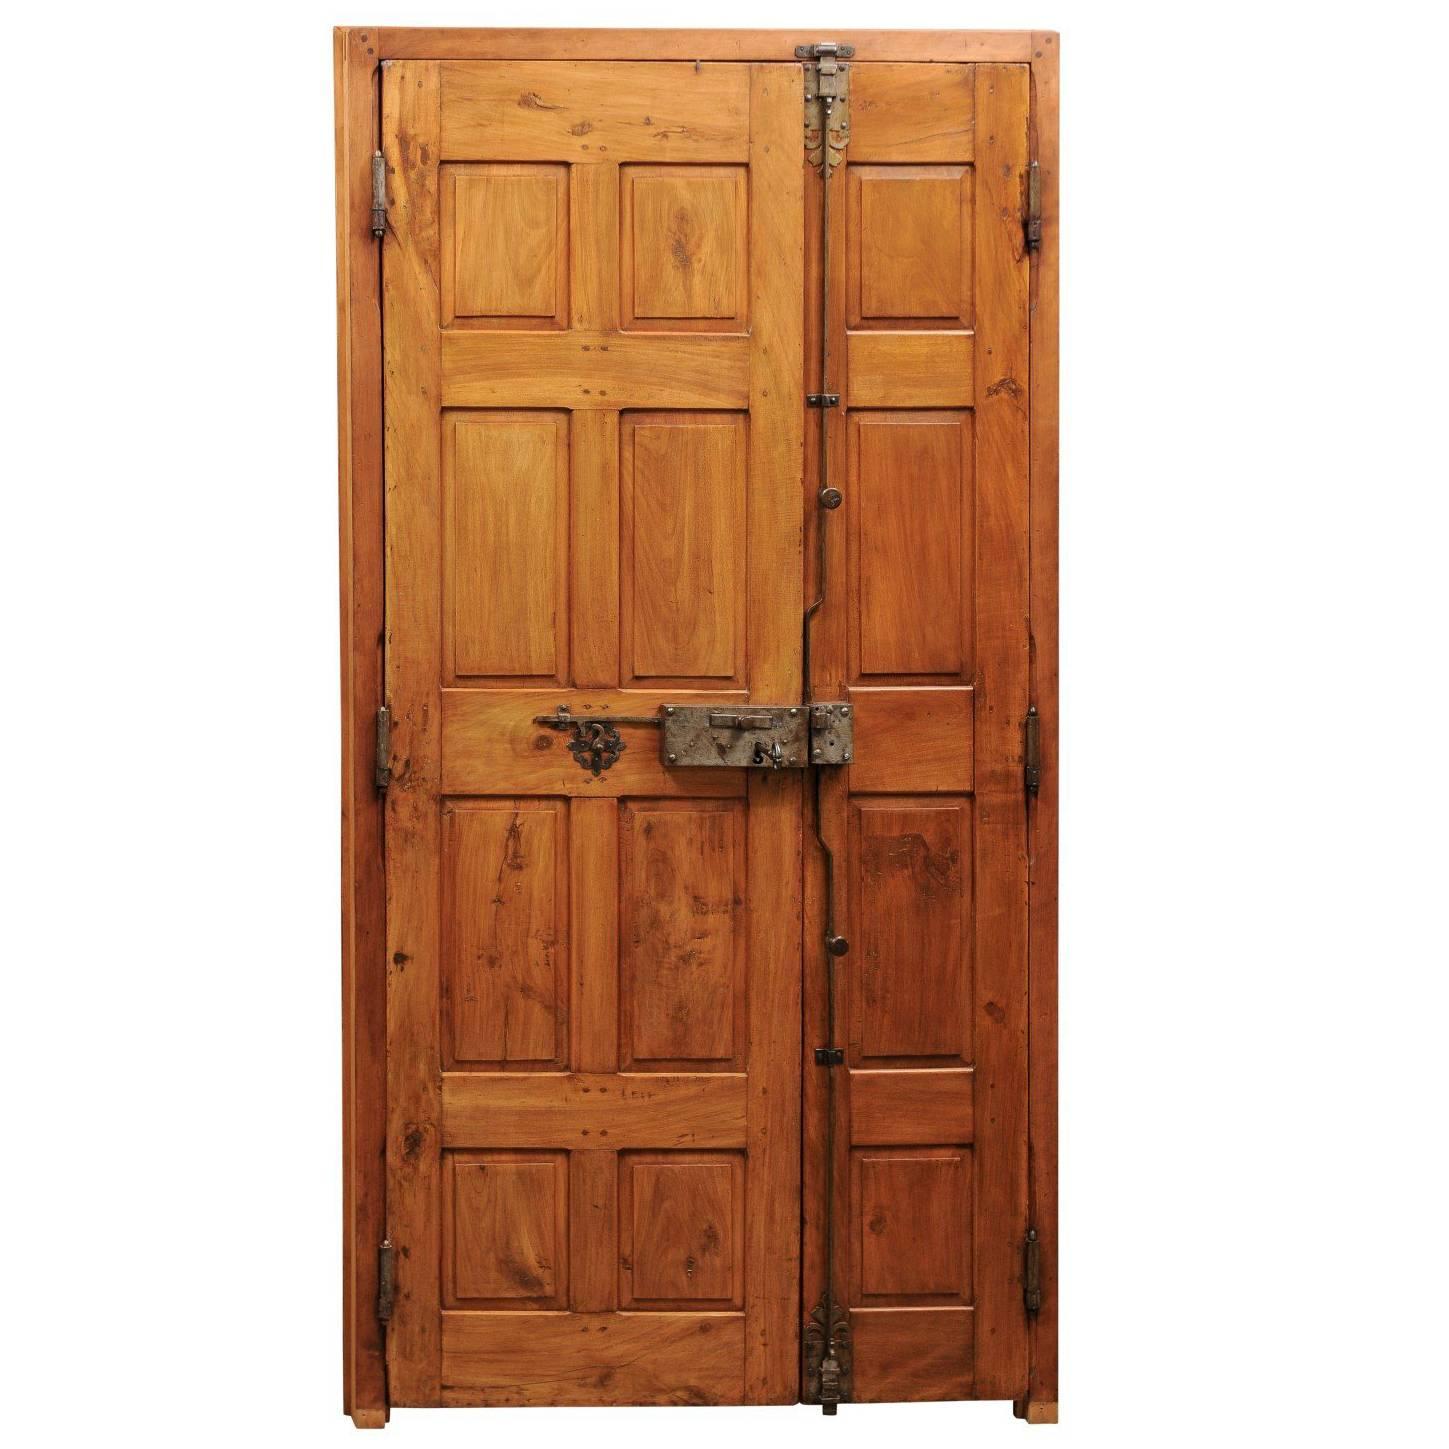 18th Century French Wooden Door with Simple Raised Panels and Original Hardware